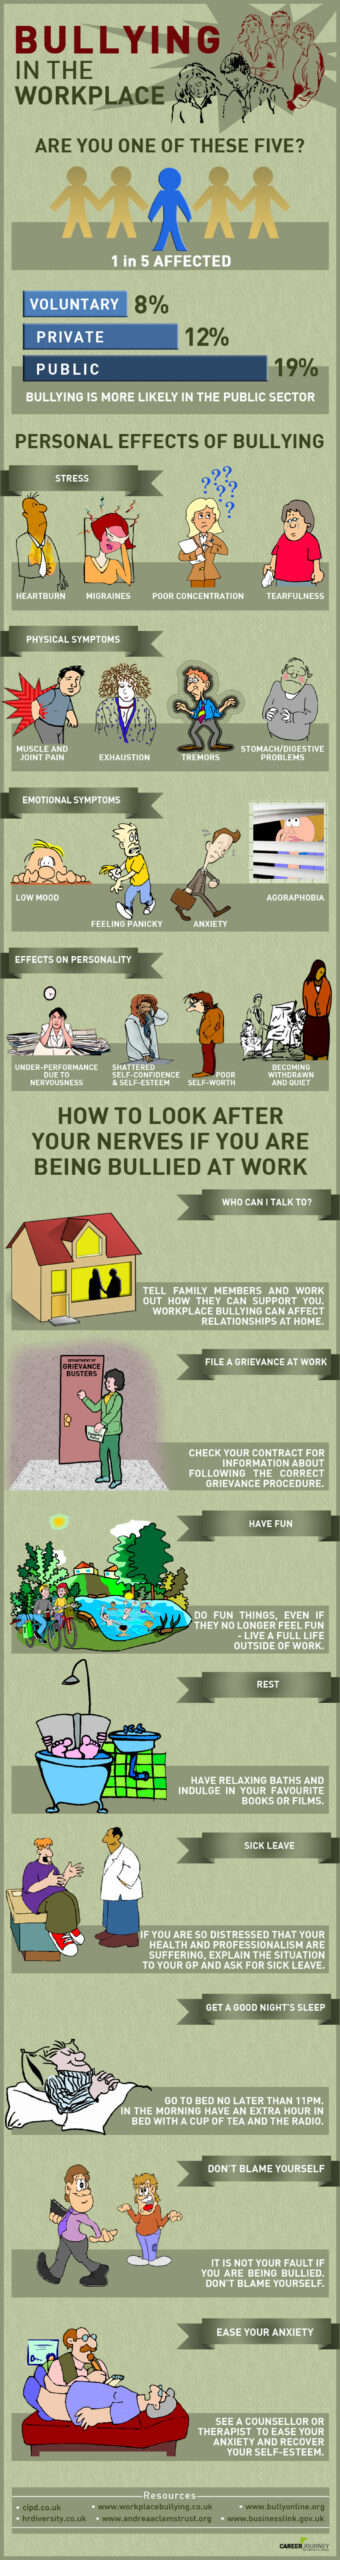 Workplace Bullying: What Can Be Done? #Infographic | Workplace bullying, Workplace, Bullying